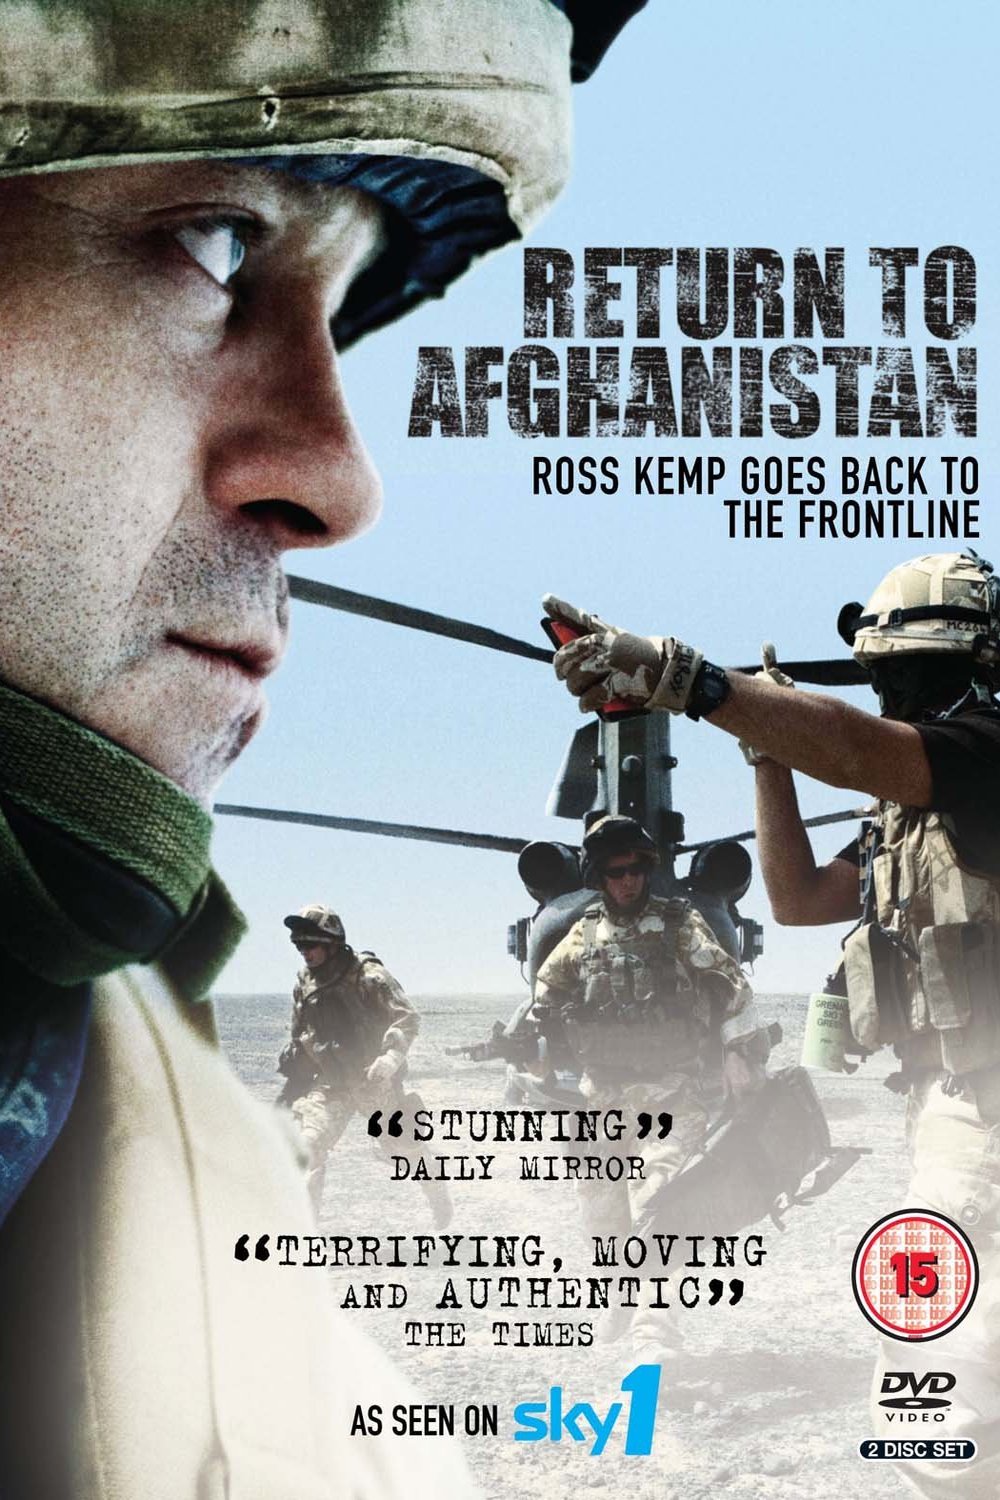 Poster of the movie Ross Kemp Return to Afghanistan